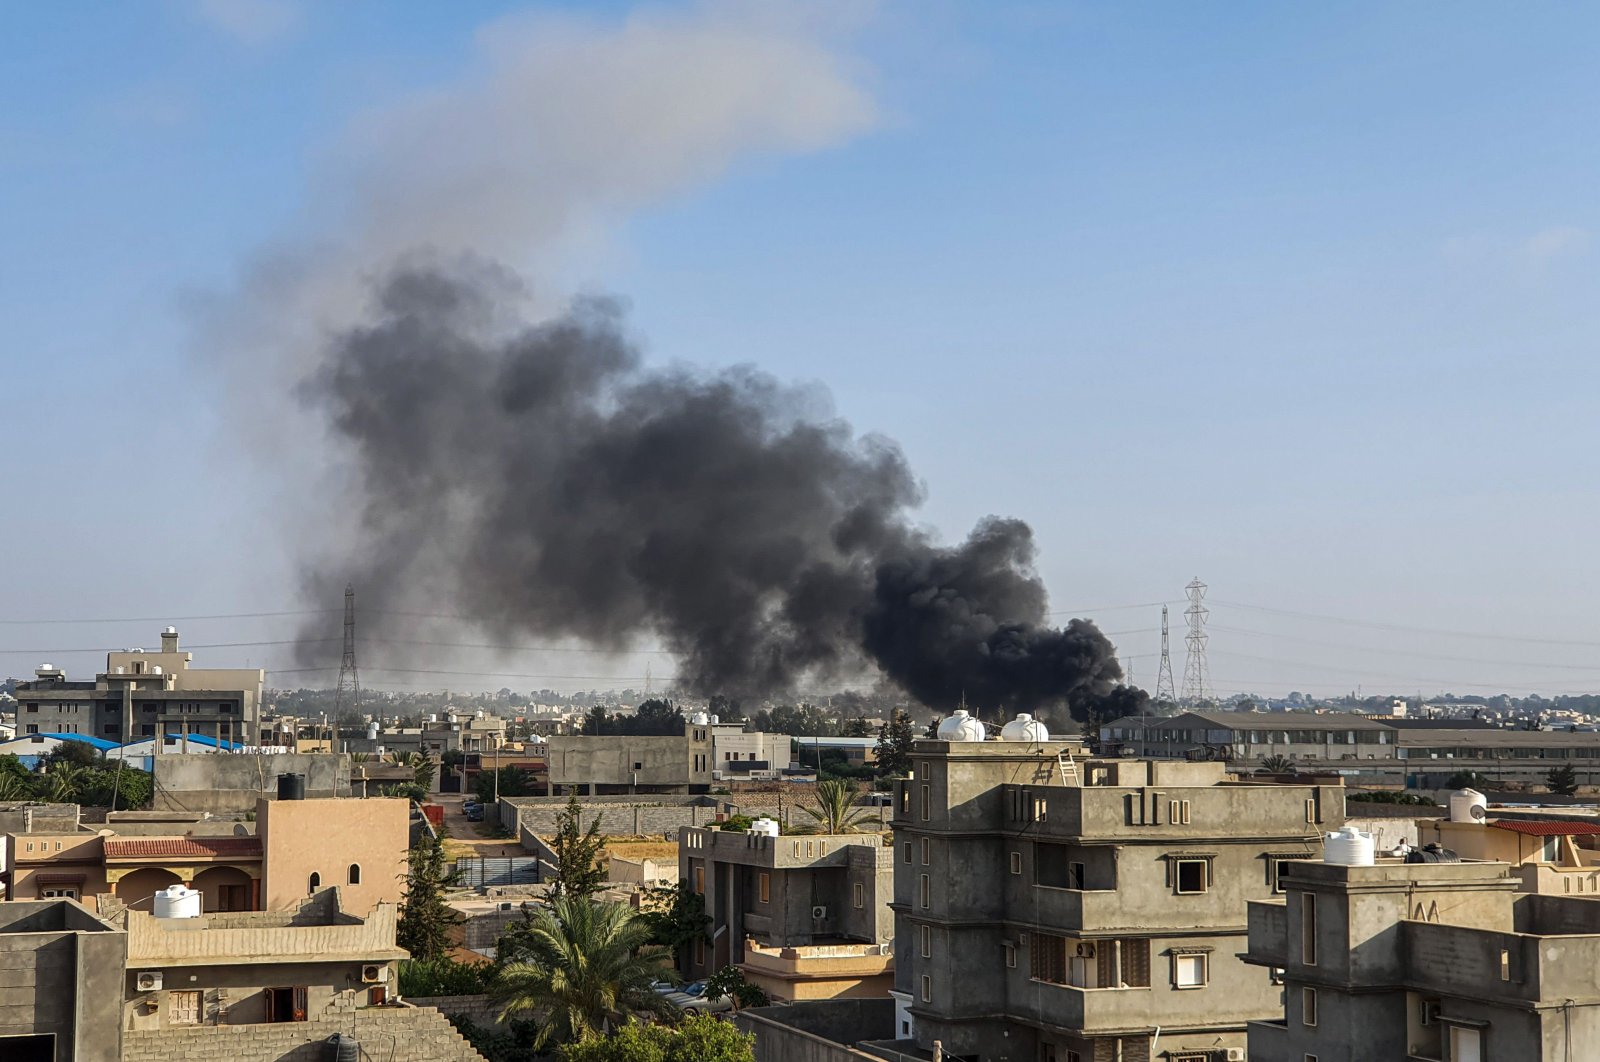 This picture taken on June 29, 2019, shows smoke plumes rising in Tajoura, south of the Libyan capital Tripoli, following a reported airstrike by forces loyal to putschist Gen. Khalifa Haftar. (AFP Photo)